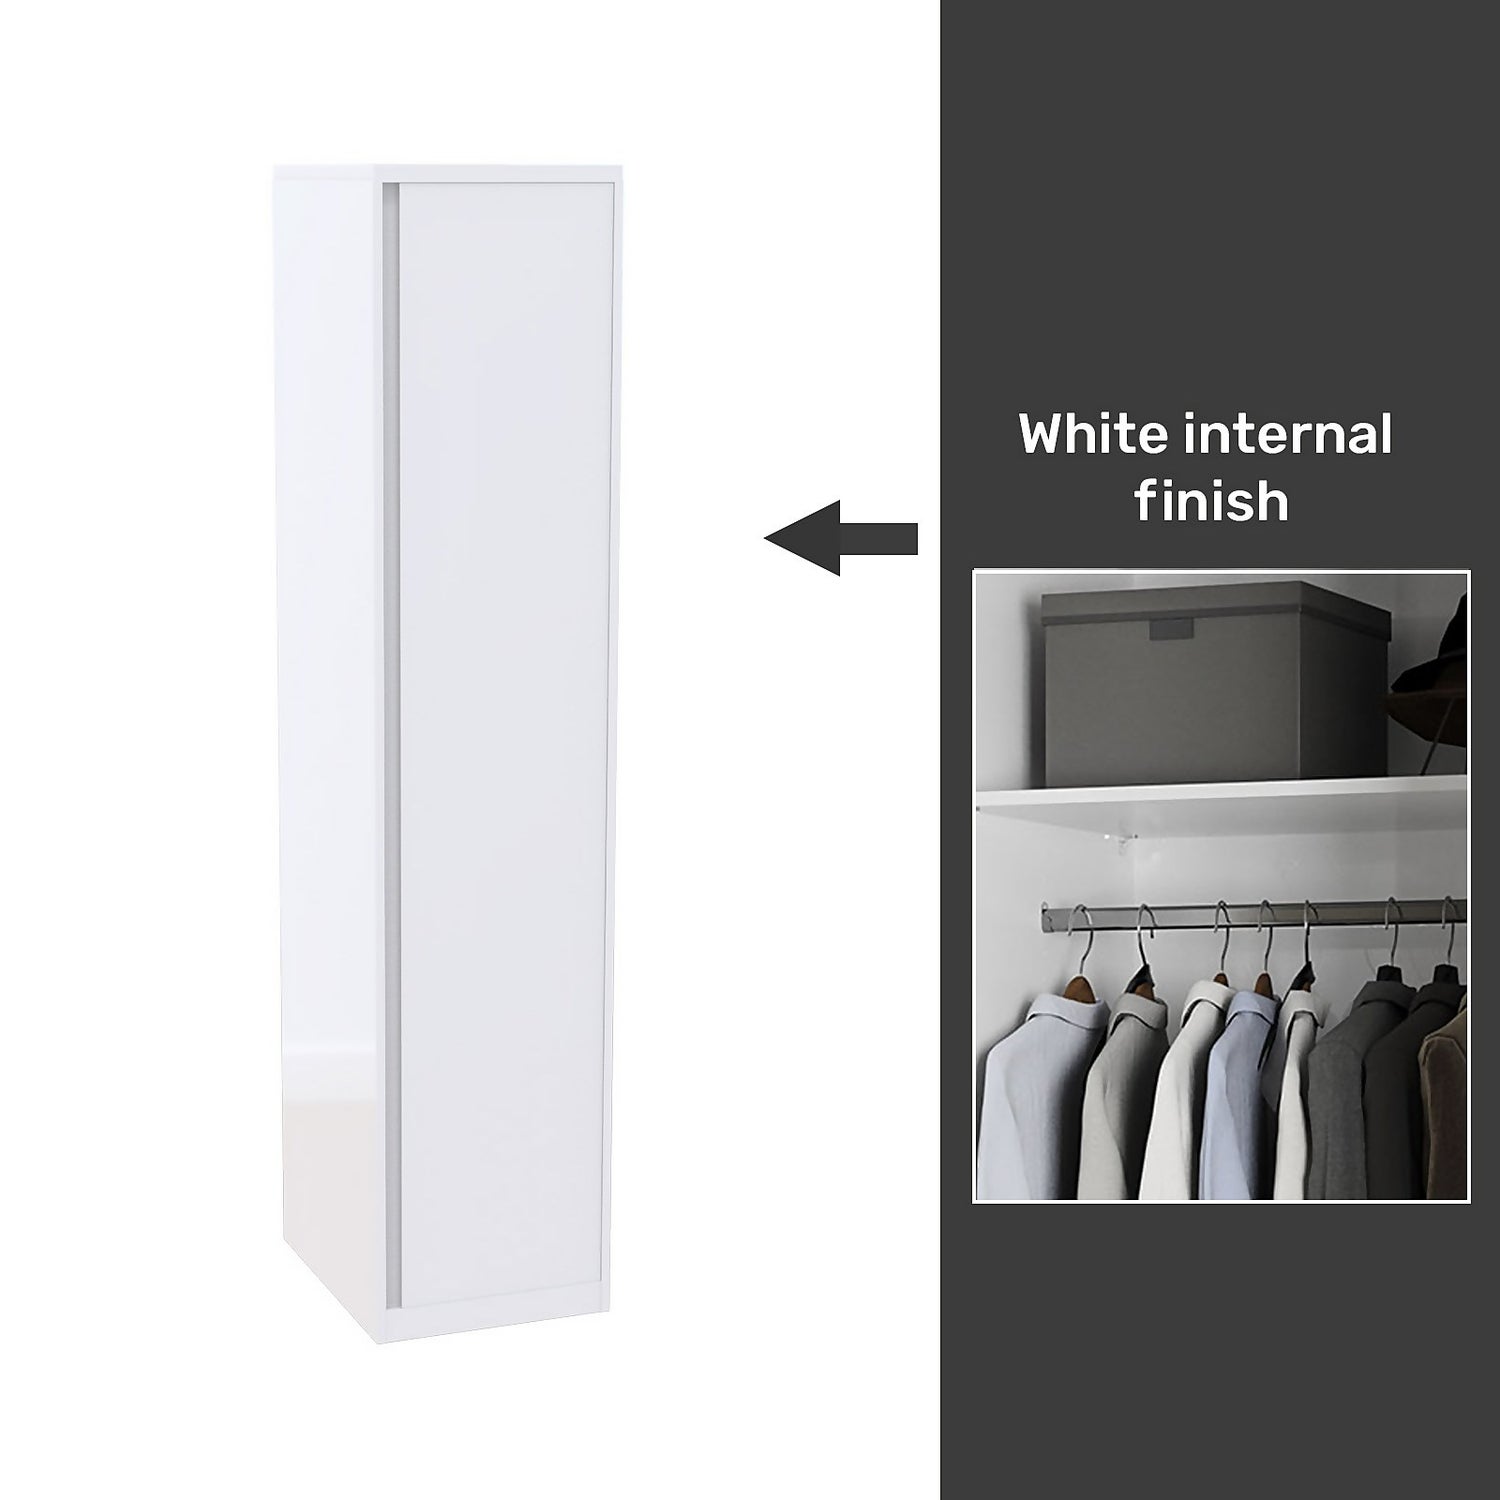 White Contemporary Coat Racks Made in The USA - Unique Arched Design -5  Hook Finishes and & standard sizes